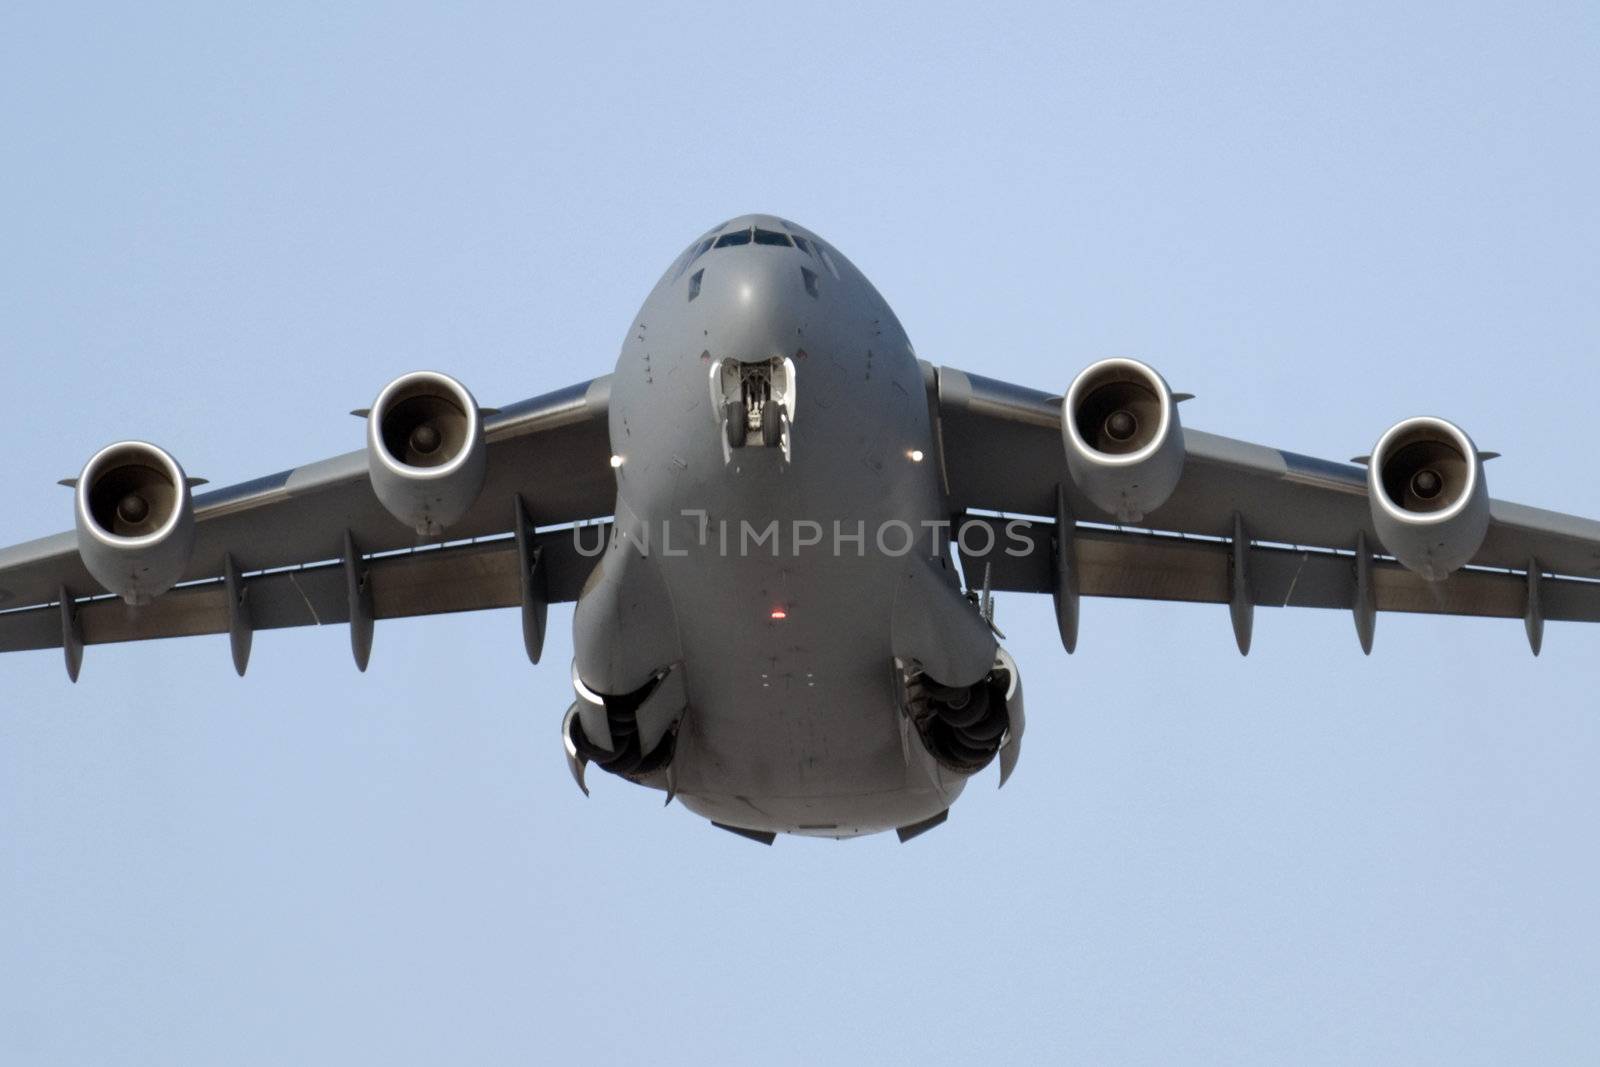 Transport plane coming in for a landing with the gear down